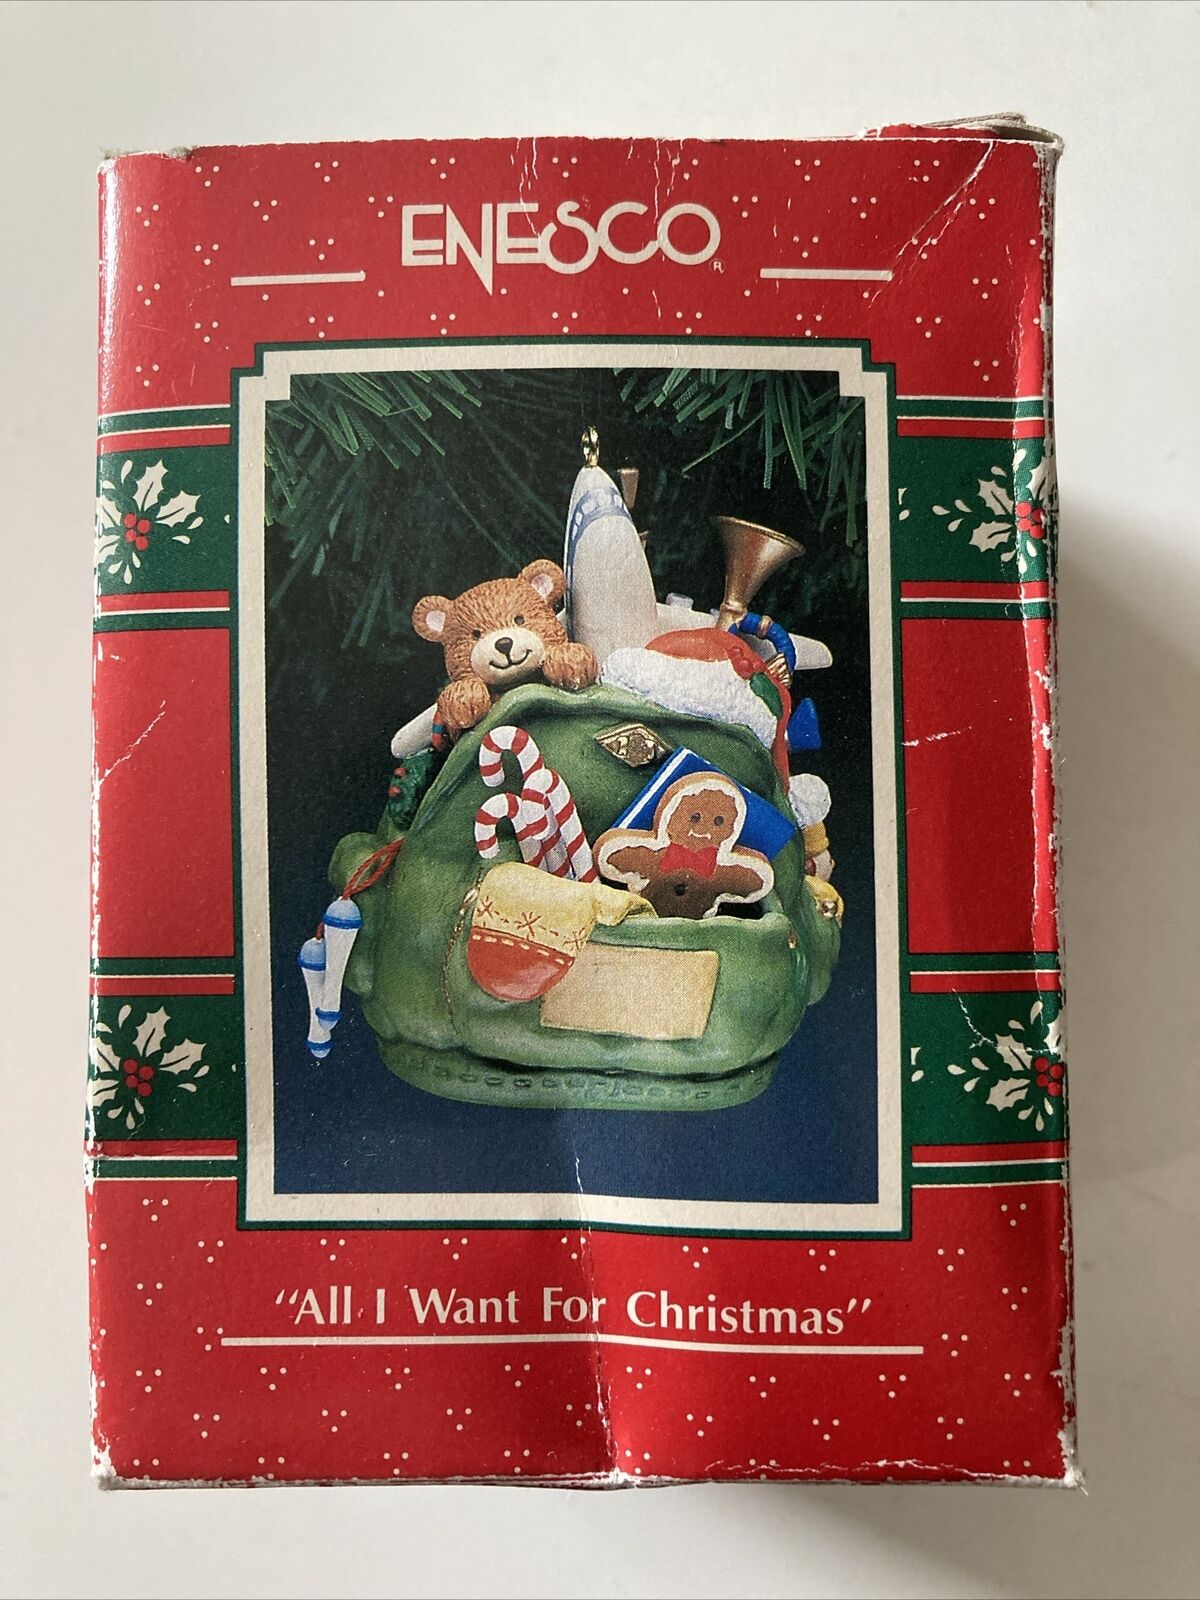 ENESCO 1991 ALL I WANT FOR CHRISTMAS ORNAMENT 577618